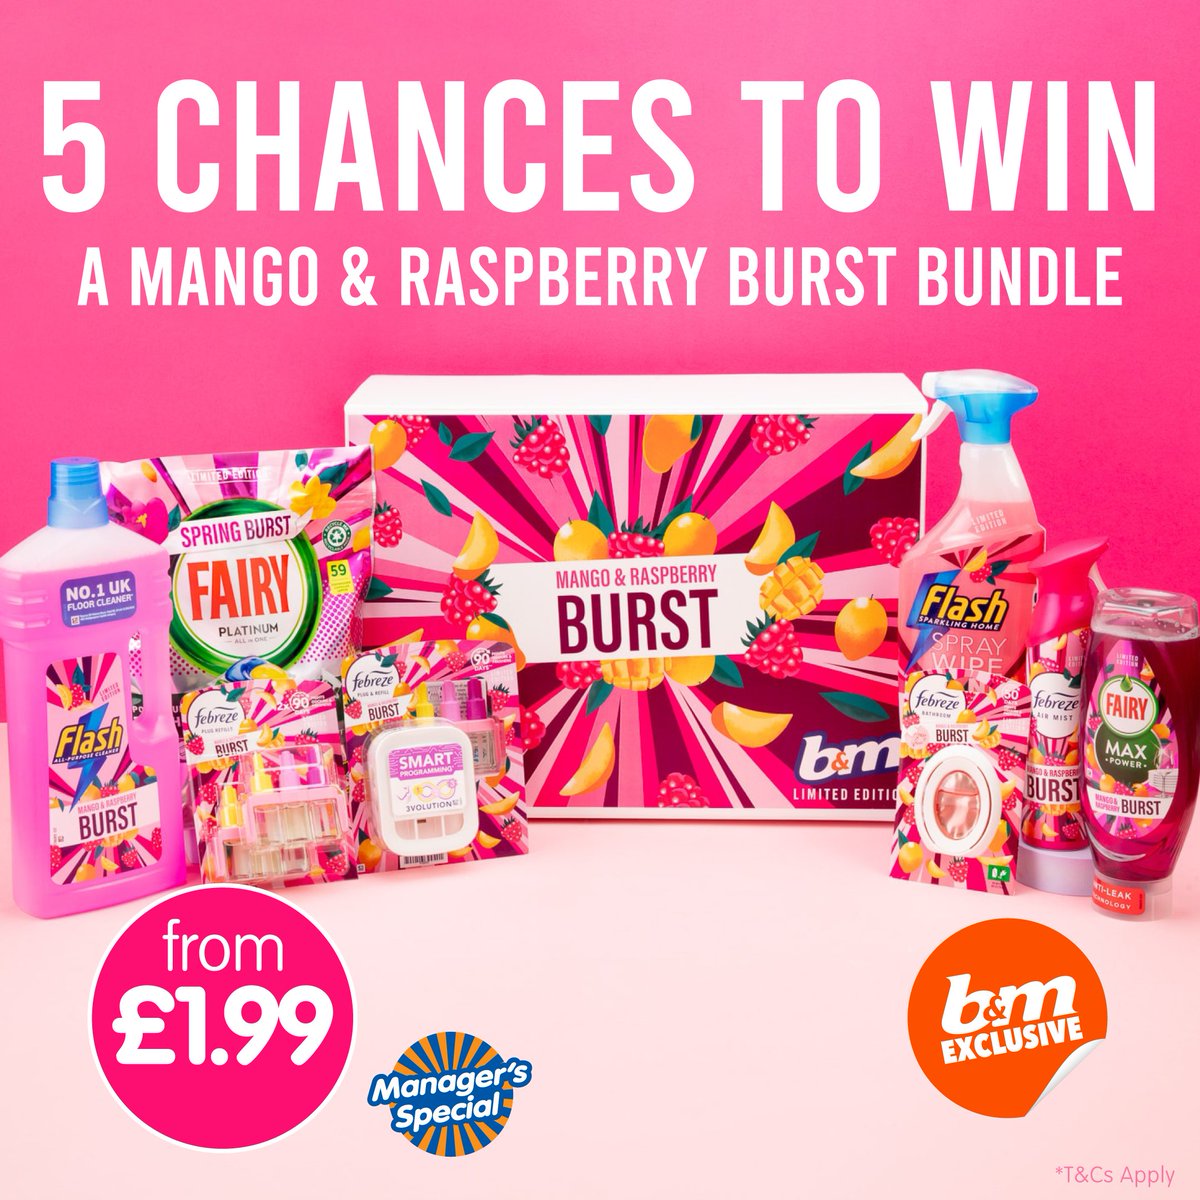 🥭 #COMPETITION TIME 🥭

To celebrate the launch of this stunning Mango & Raspberry Burst range, we're giving away FIVE chances to #WIN this fab bundle!

For a chance to WIN, simply;

1) FOLLOW US
2) RT
3) COMMENT #BMMangoRaspberry

Competiton ends 9am 6/6/24